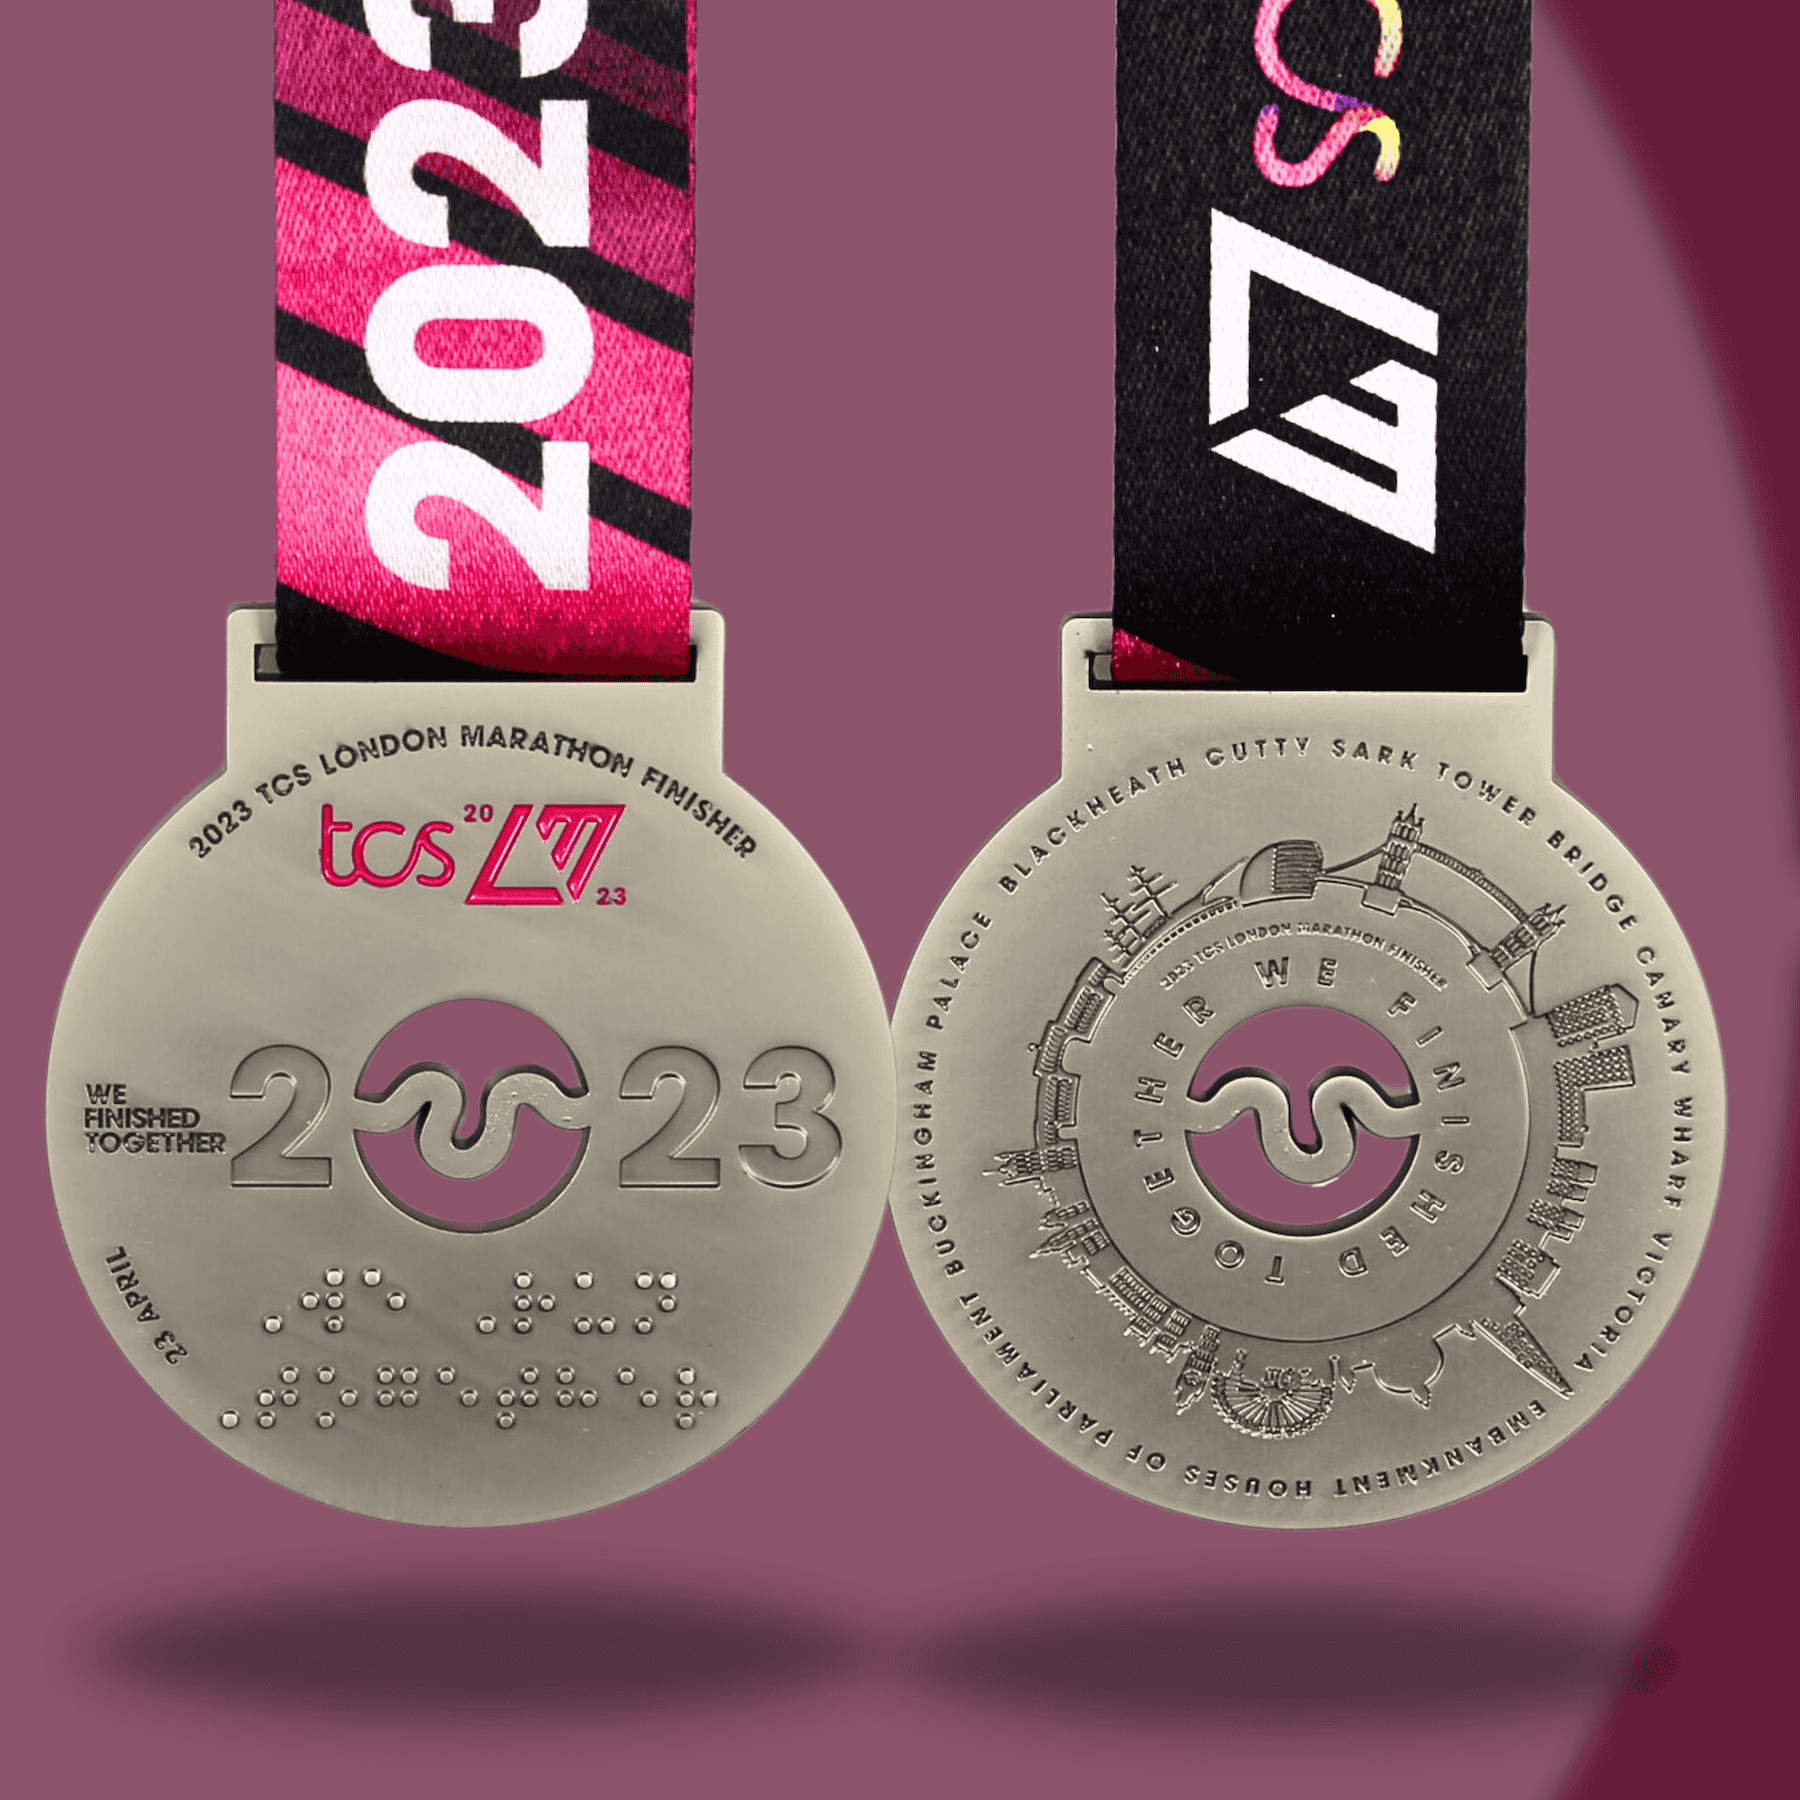 Two sided medals